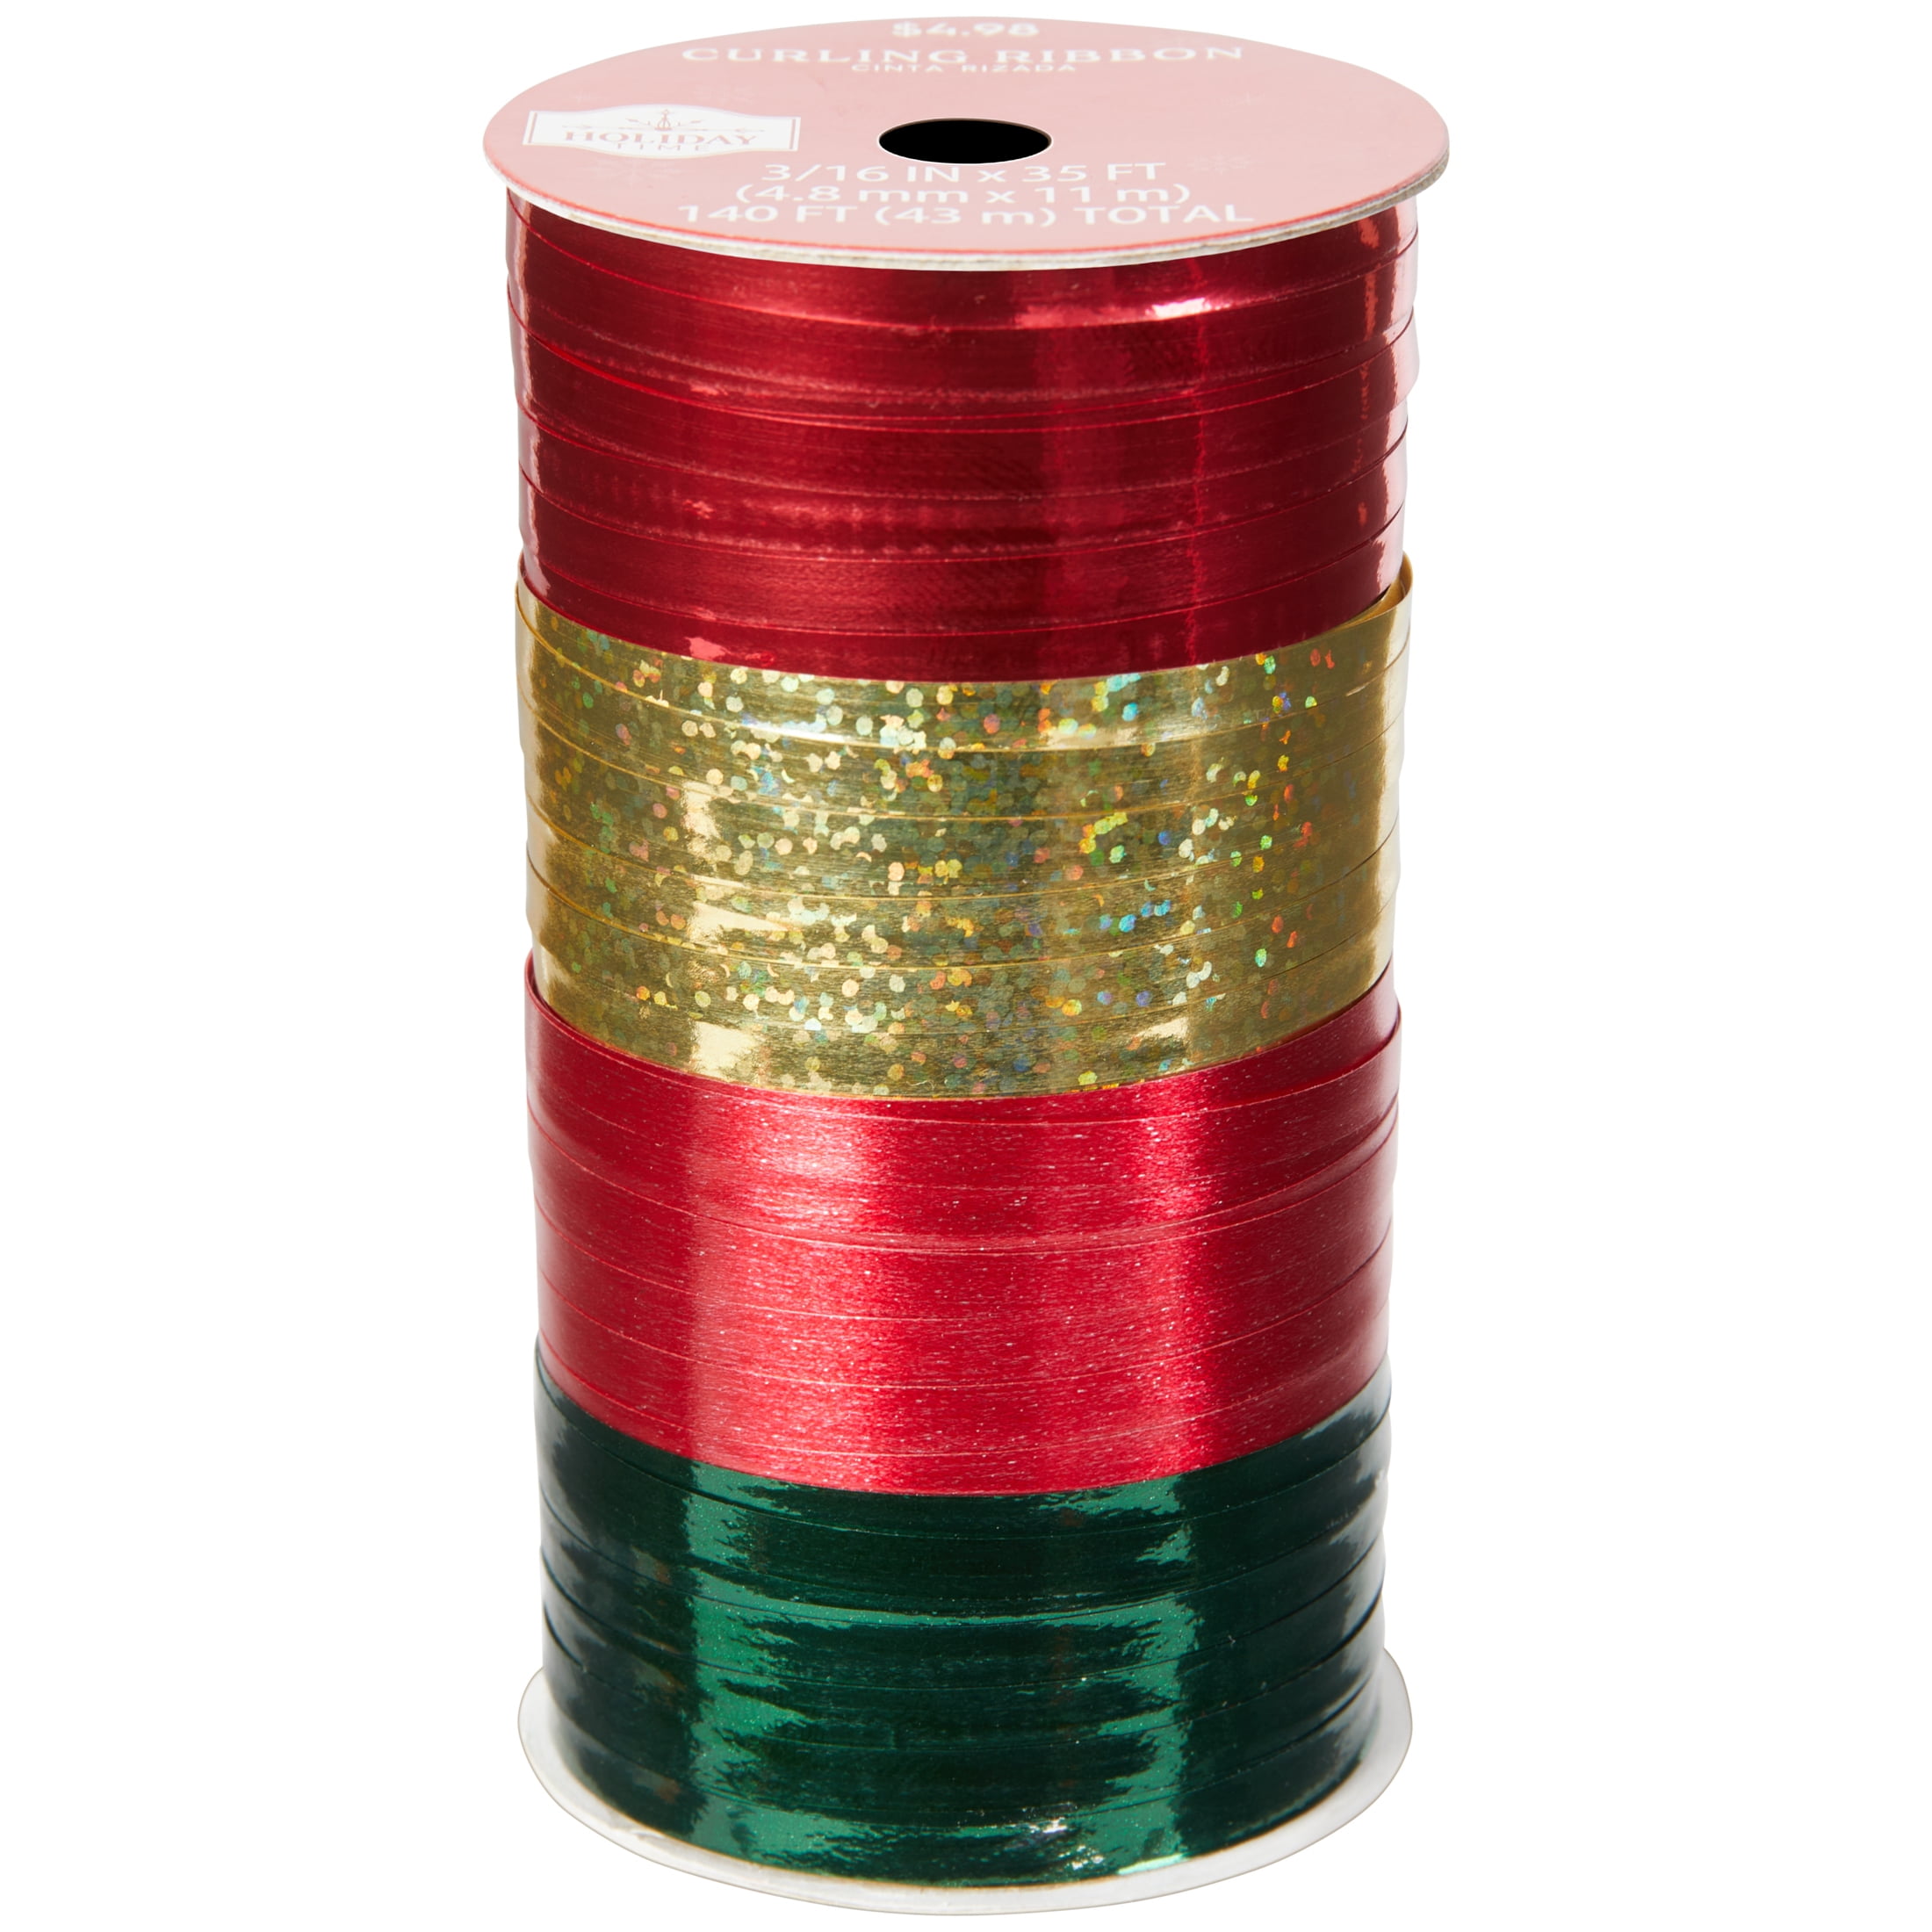 Value Ribbon Crimped 3/16 x 500 yd Curling Ribbon for Gift Wrapping, Teal Ribbons for Crafts, Art Supplies and Birthday Gifts for Women and Men